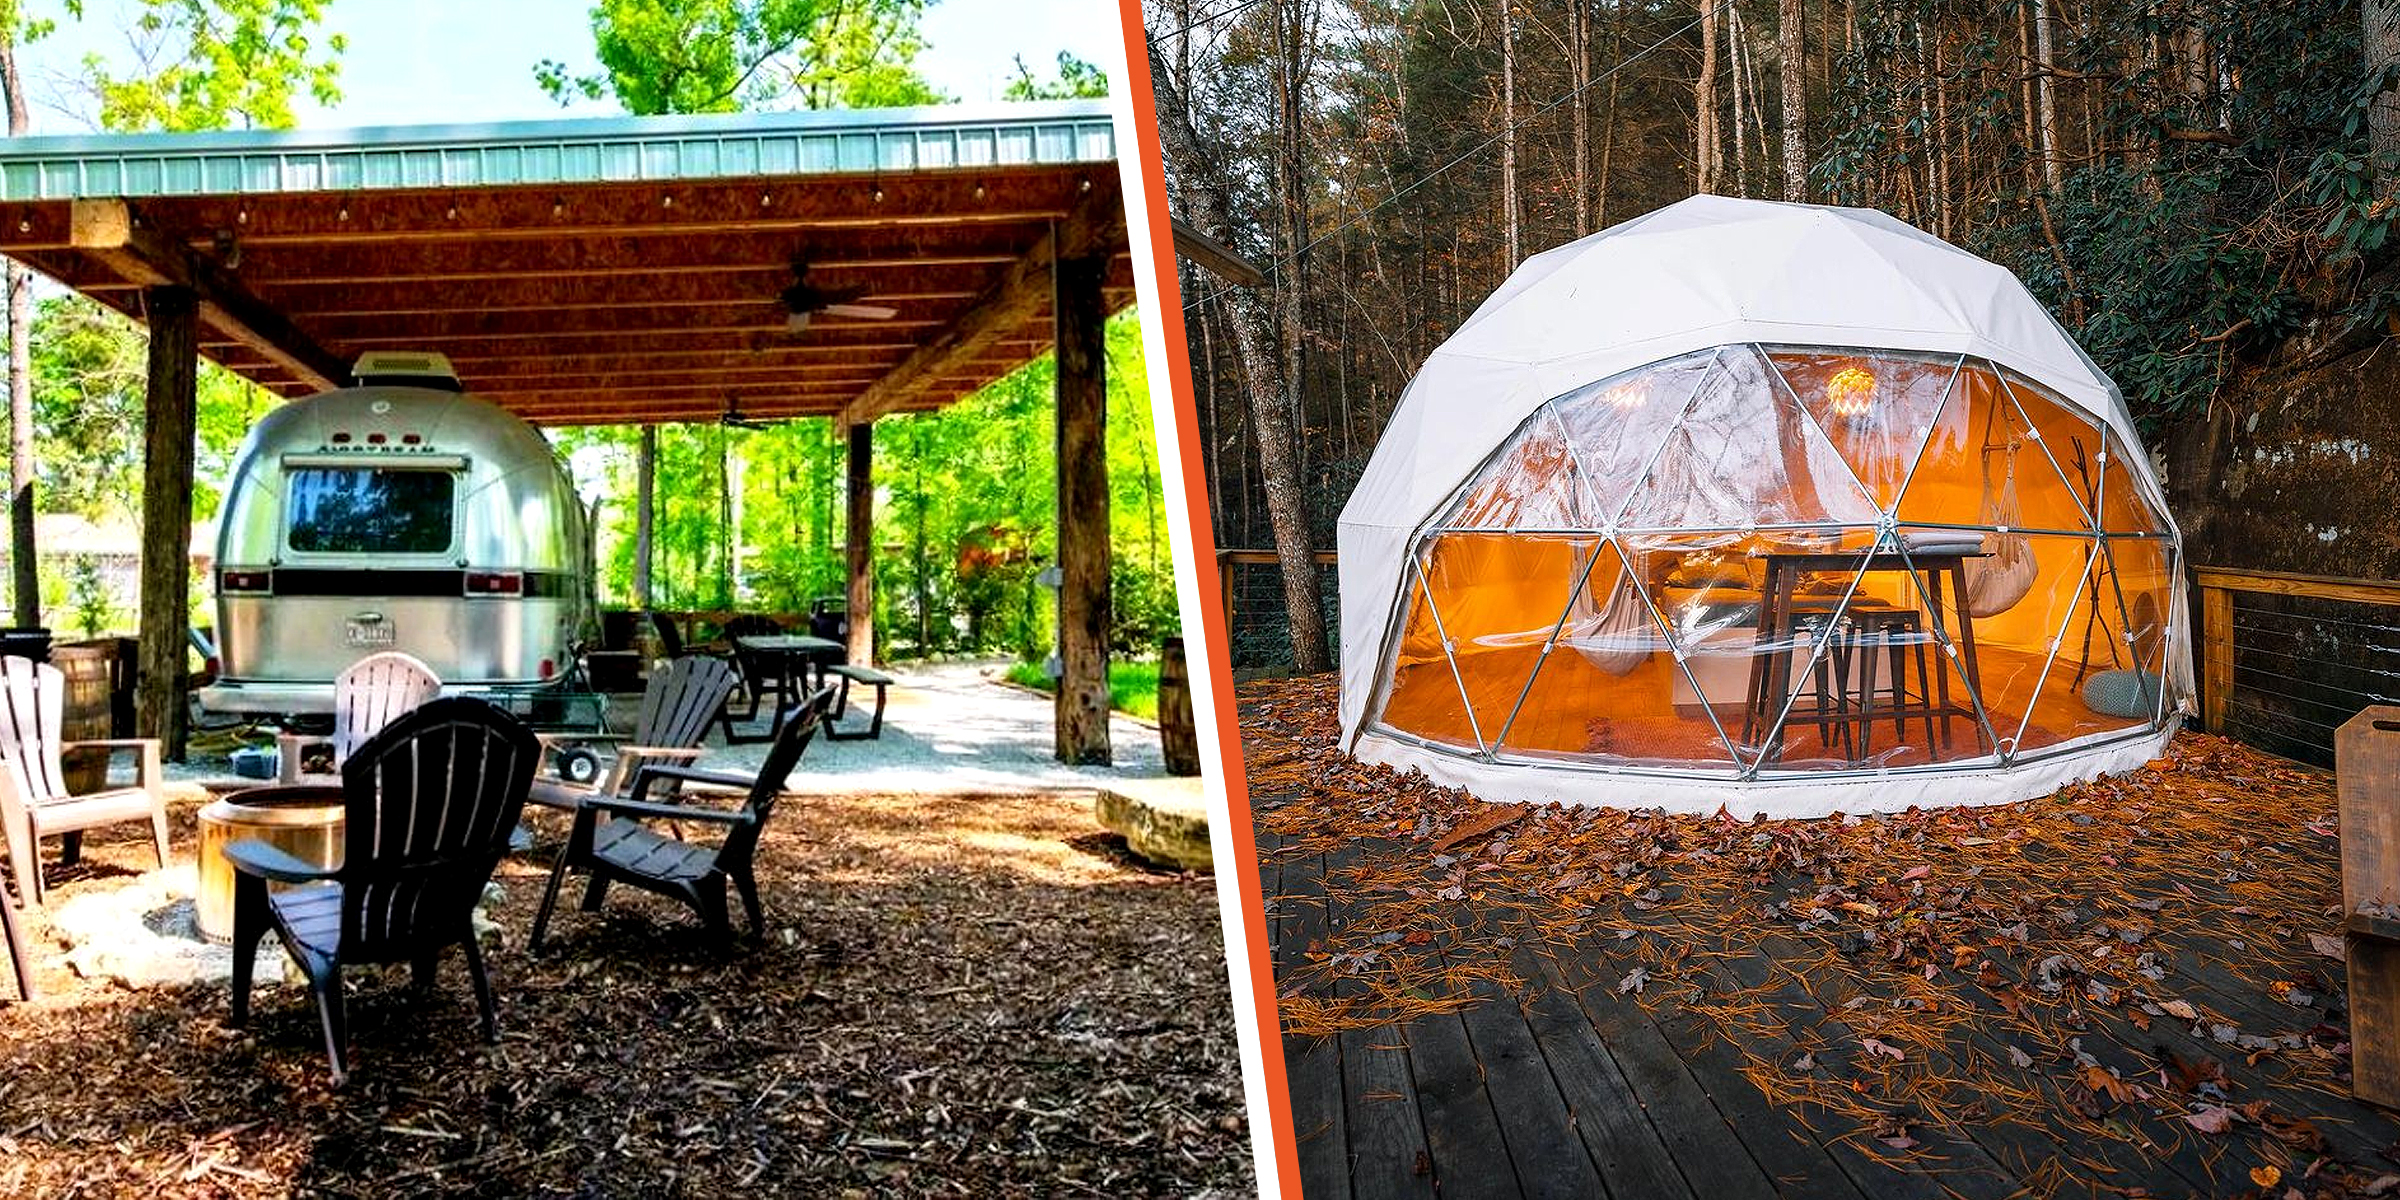 An Airstream accommodation at Progress Park | A geodesic dome by the Canopy Crew in Red River Gorge | Source: Instagram/progressparkky | Instagram/canopycrew